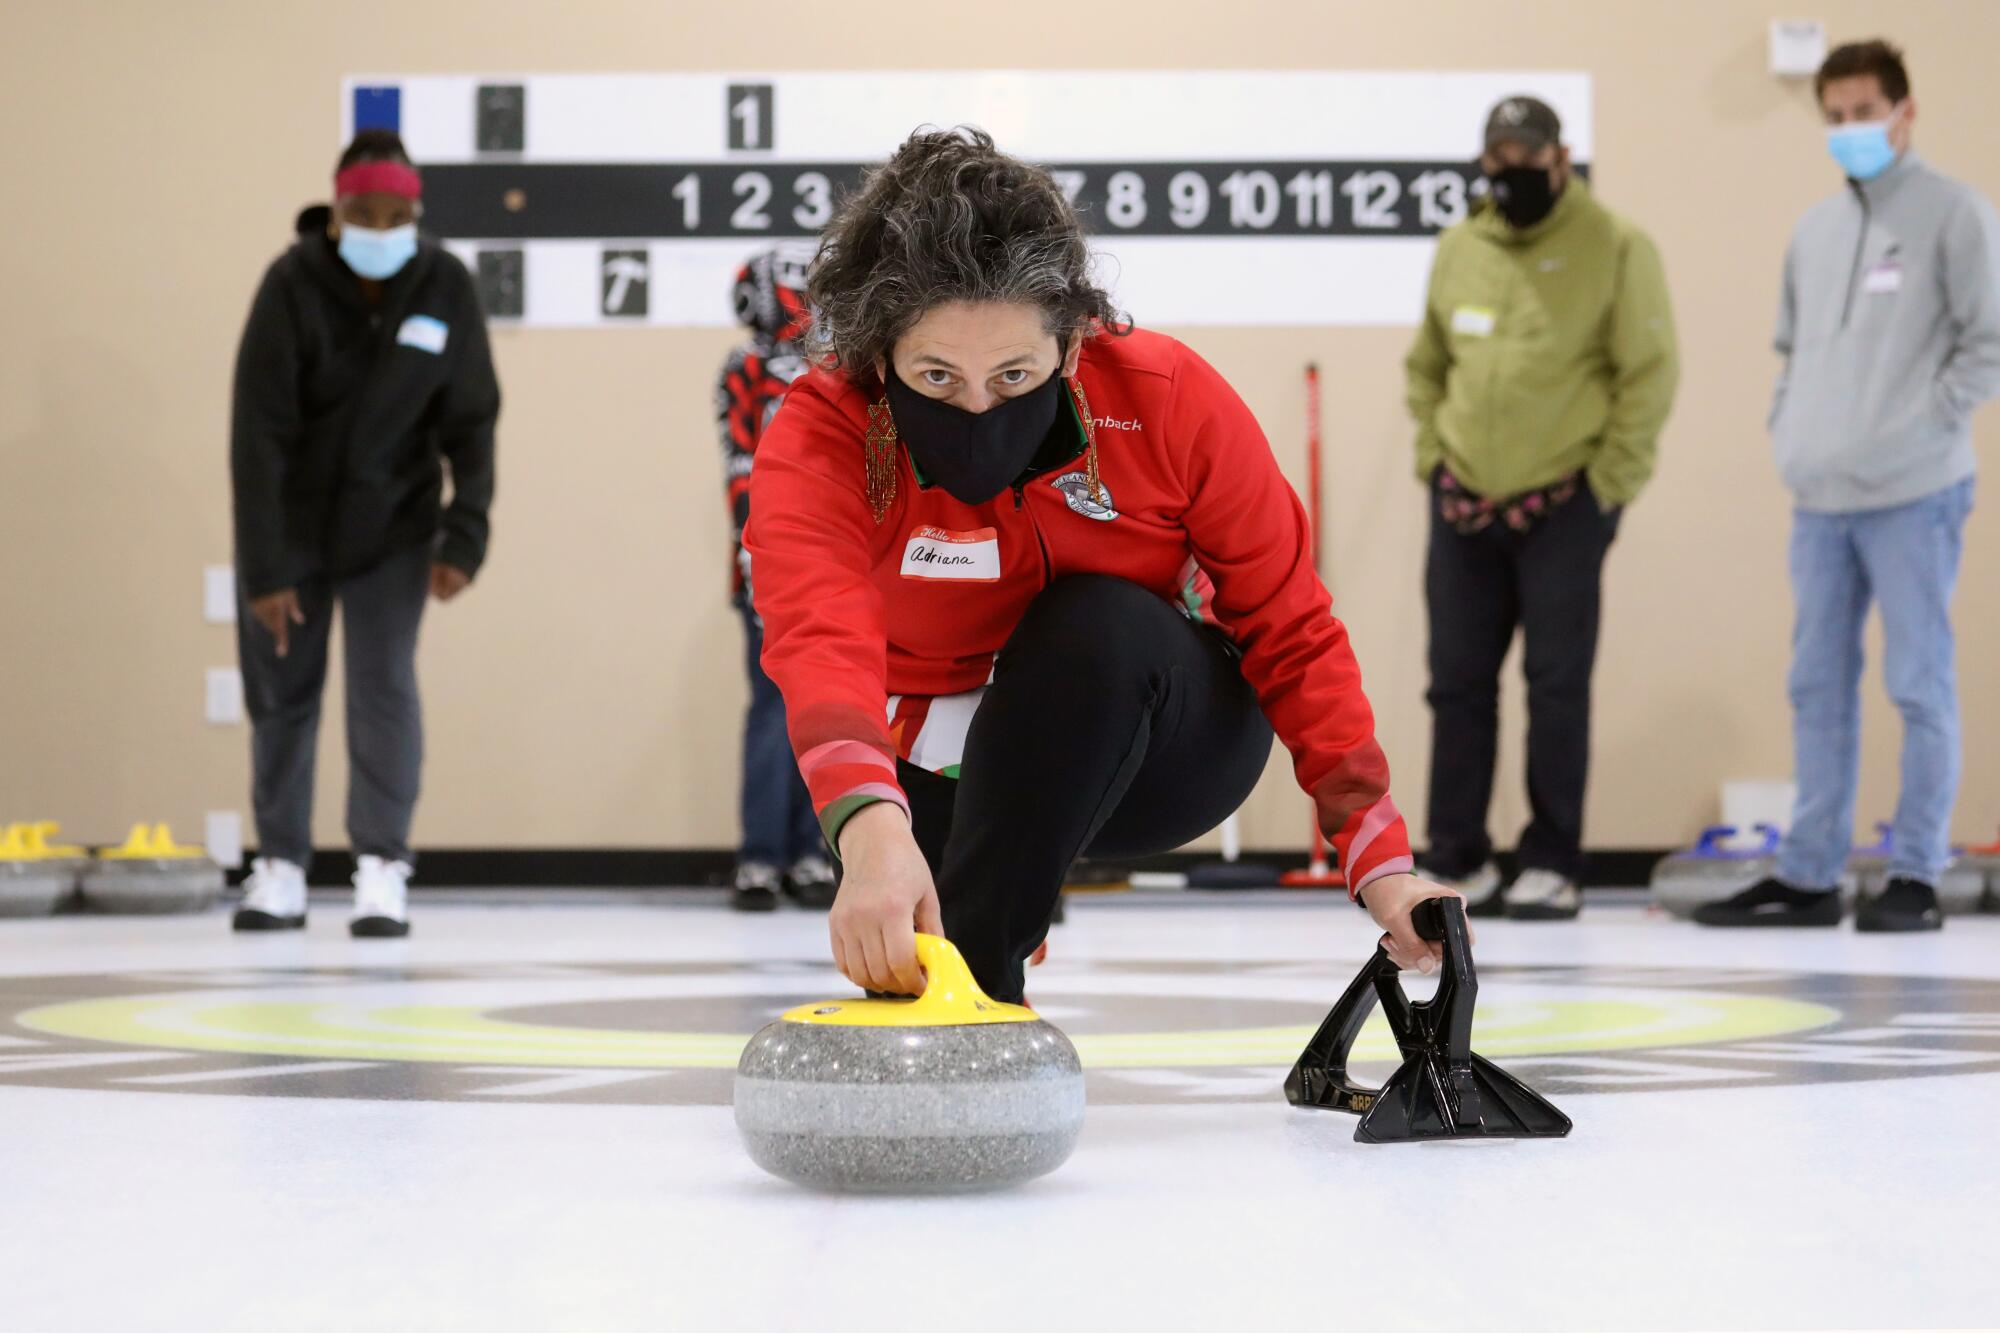 Instructor Adriana Camarena, who is a member of the Mexican curling team, demonstrates to students how to deliver a stone